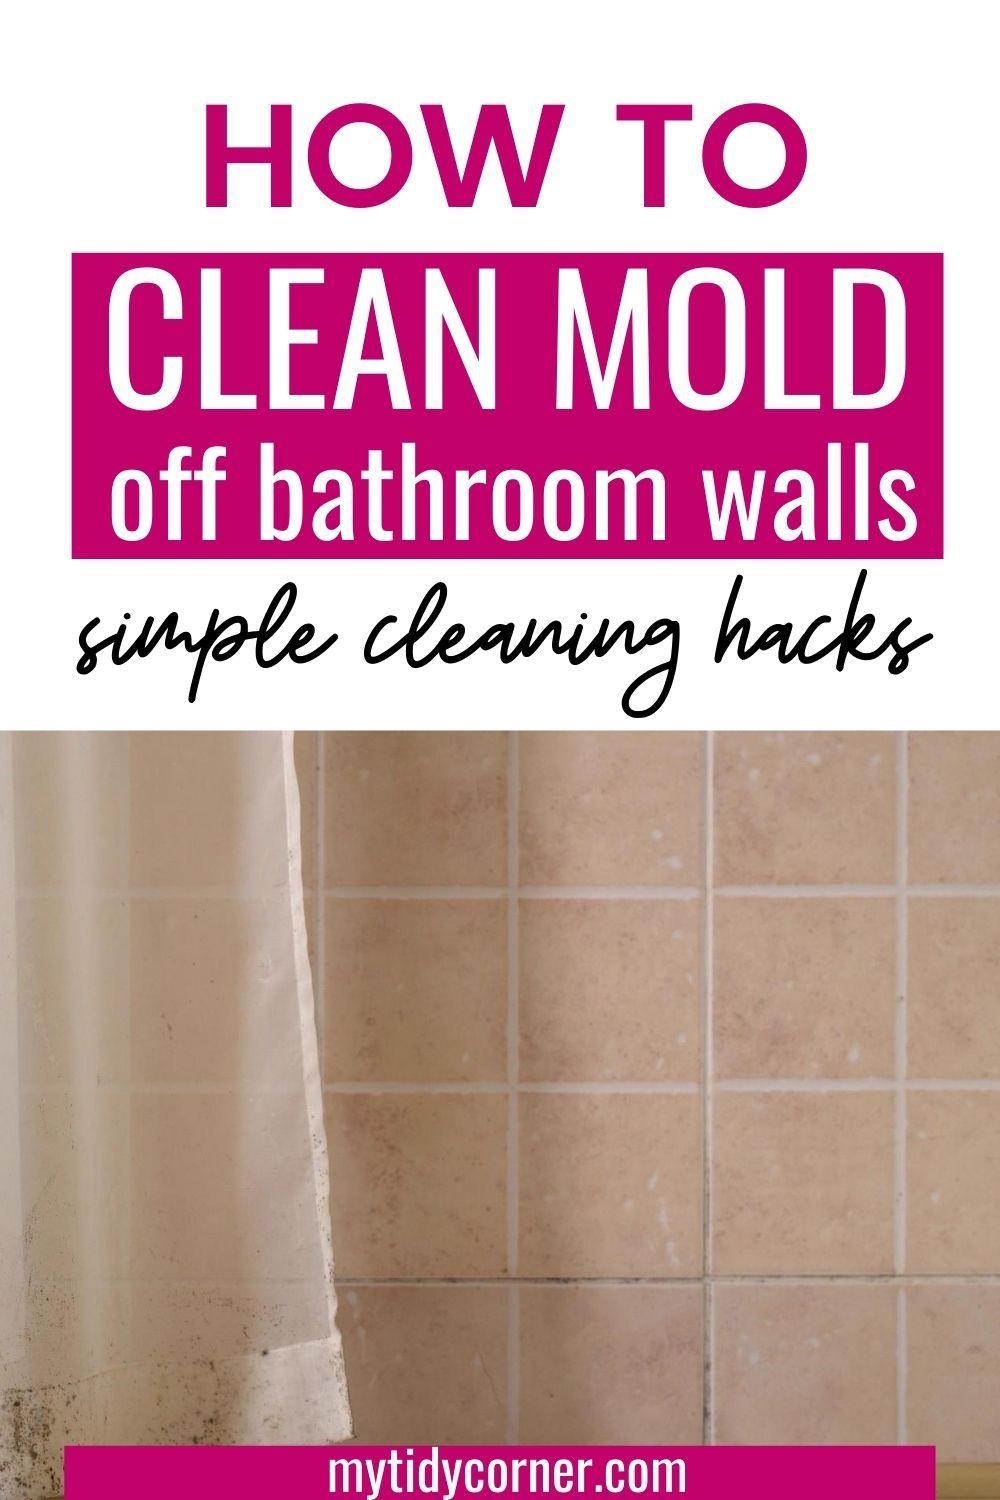 How to Clean Mold from Walls in Bathroom